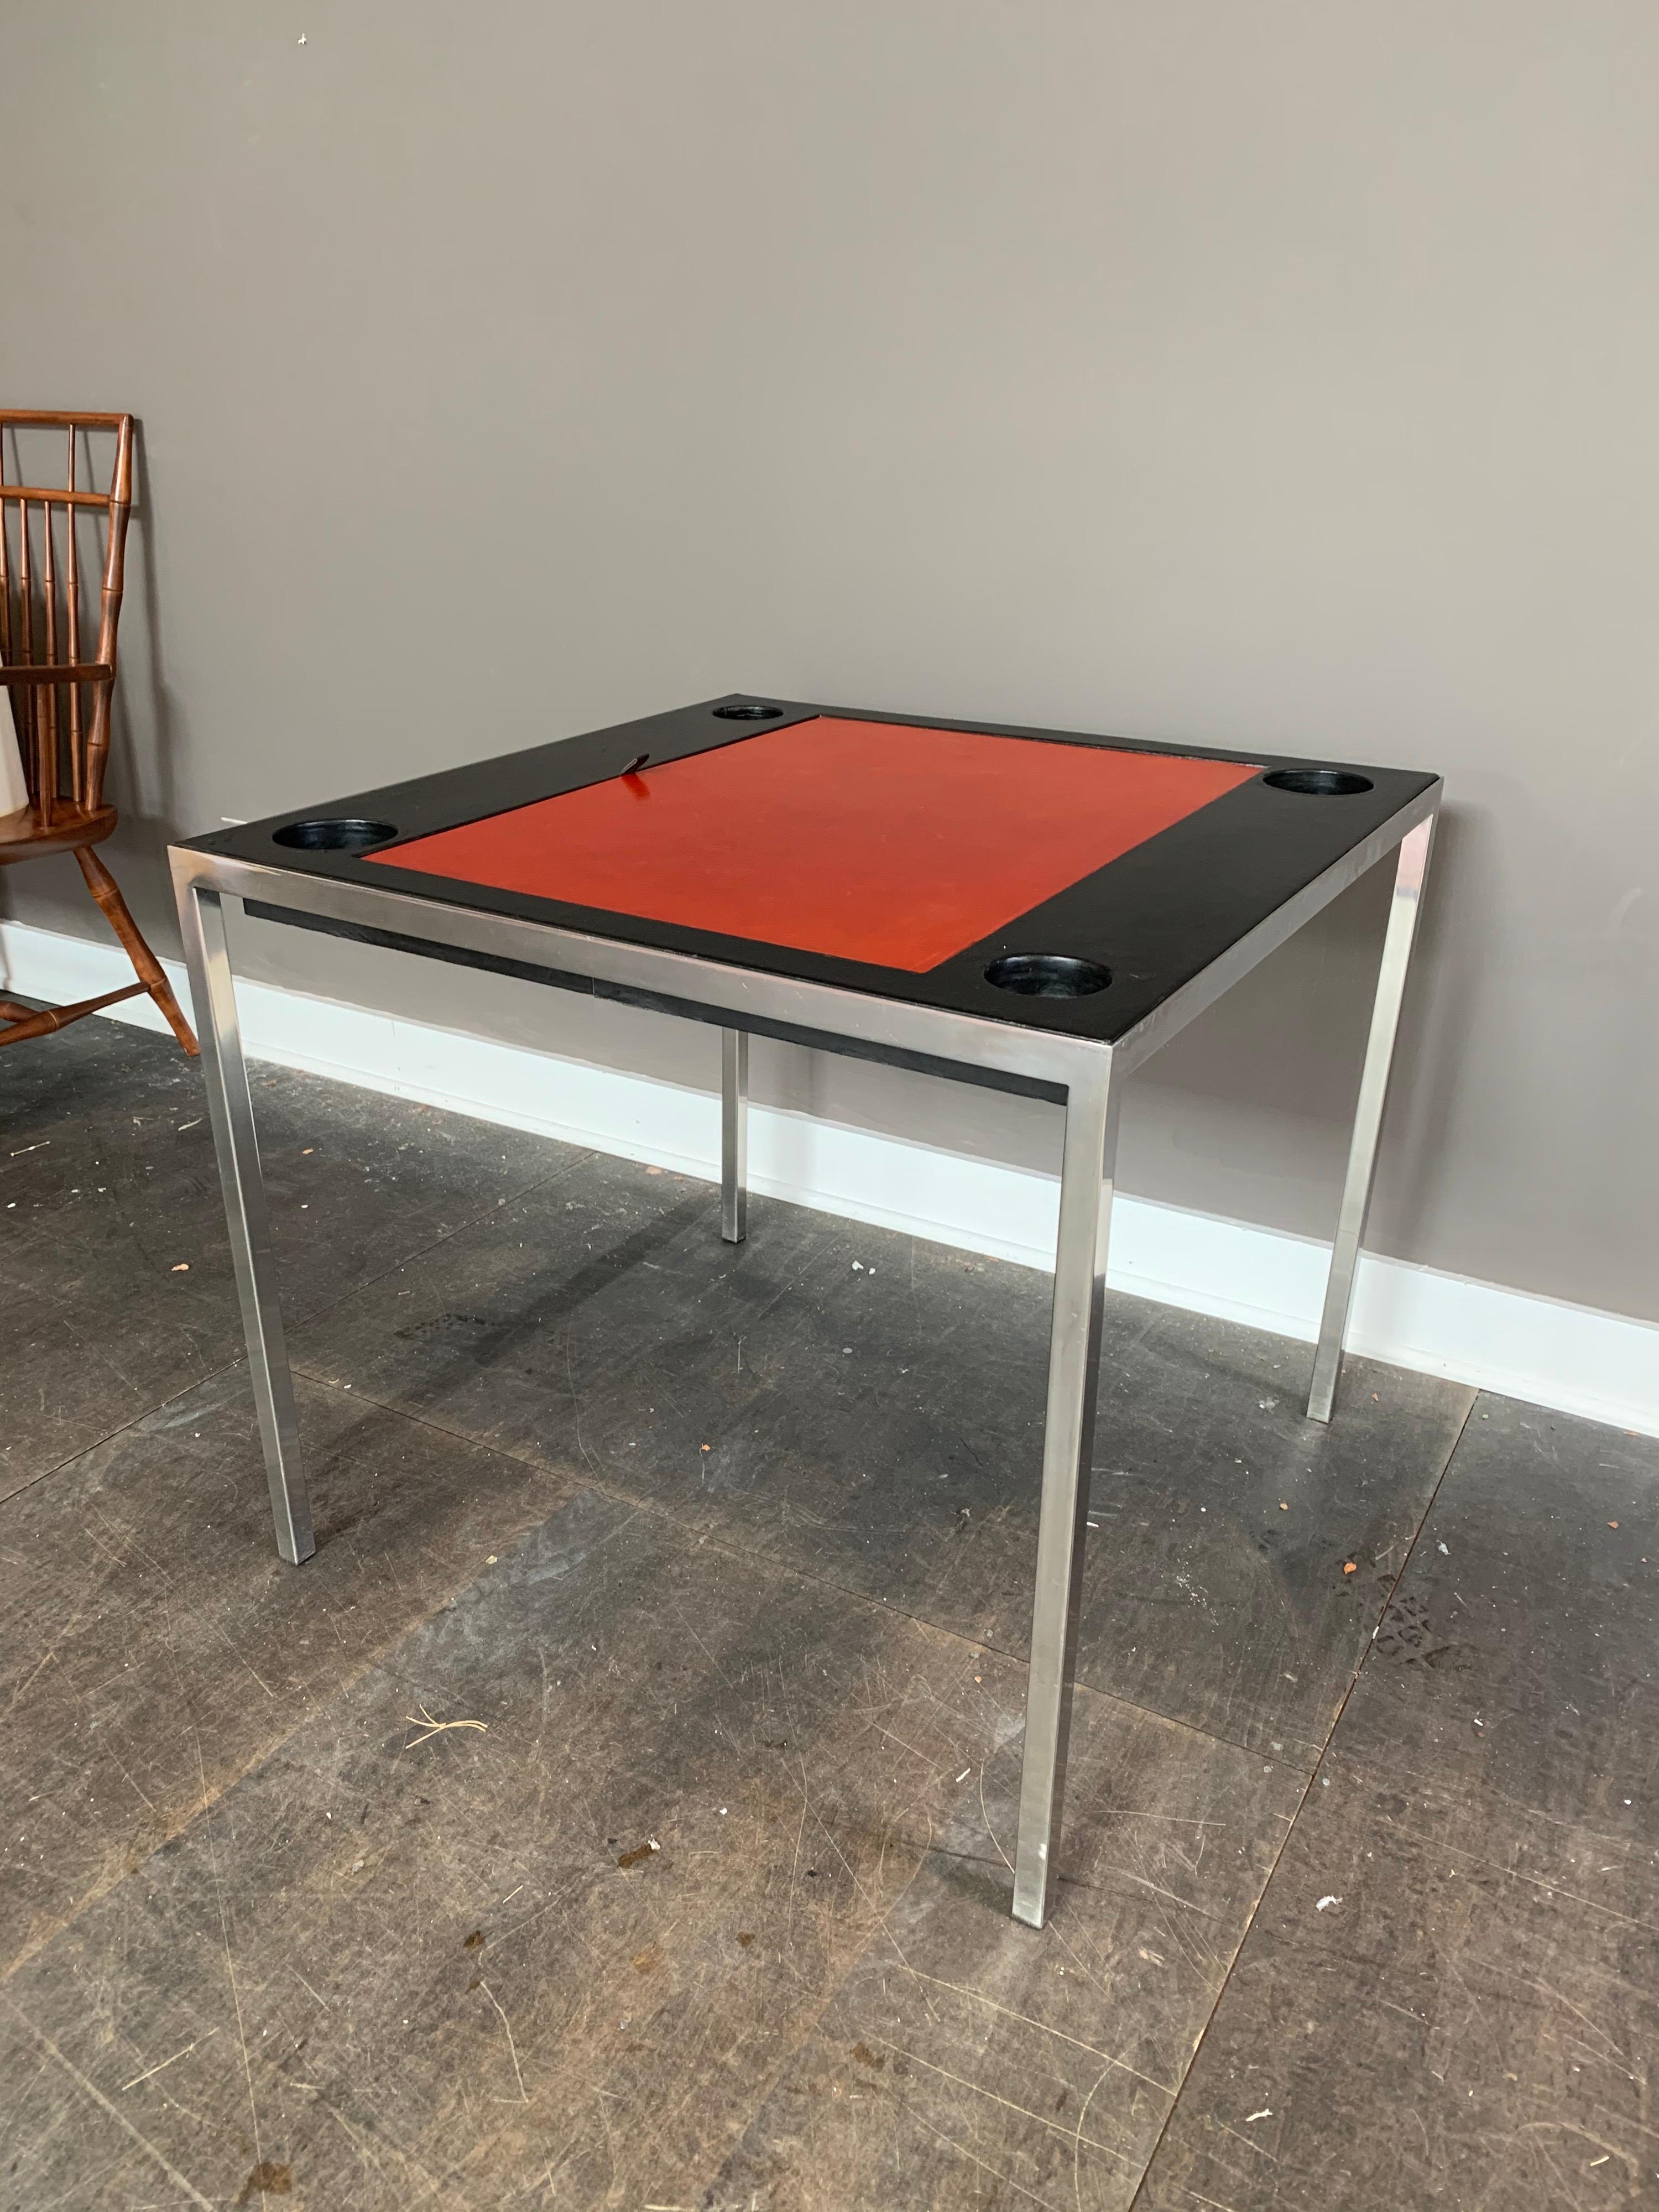 Stamped Jansen, this chromed steel and black and red leather backgammon games table, circa 1975, provenance: Malmaison, Roger Prigent Enterprises. This beautiful table has a red leather top that opens to the backgammon play area. Although